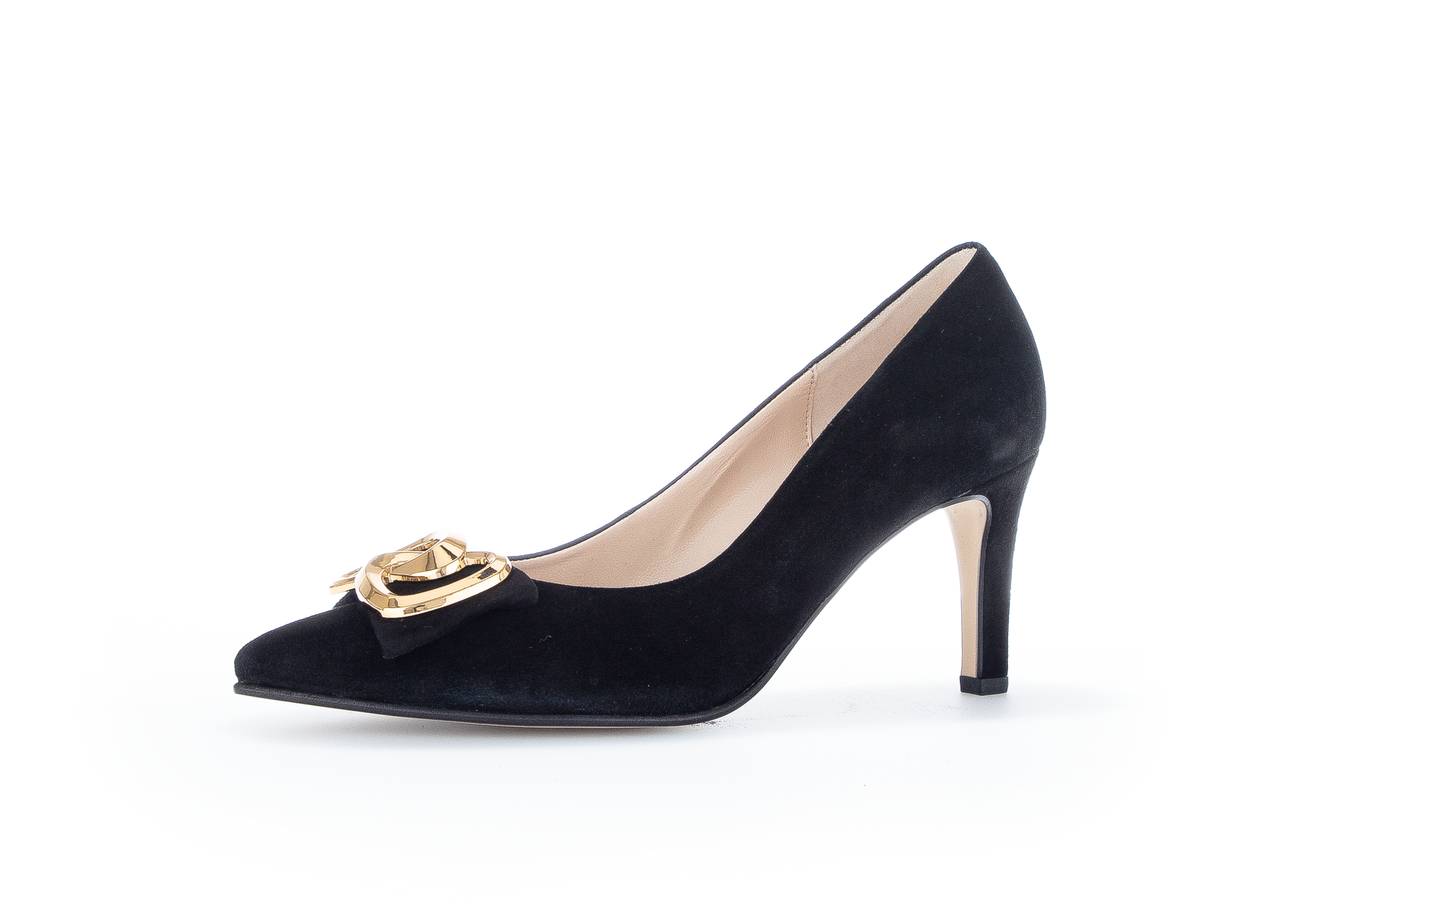 Gabor 91.381.17 Black Suede Heels with Gold Bow Detailing